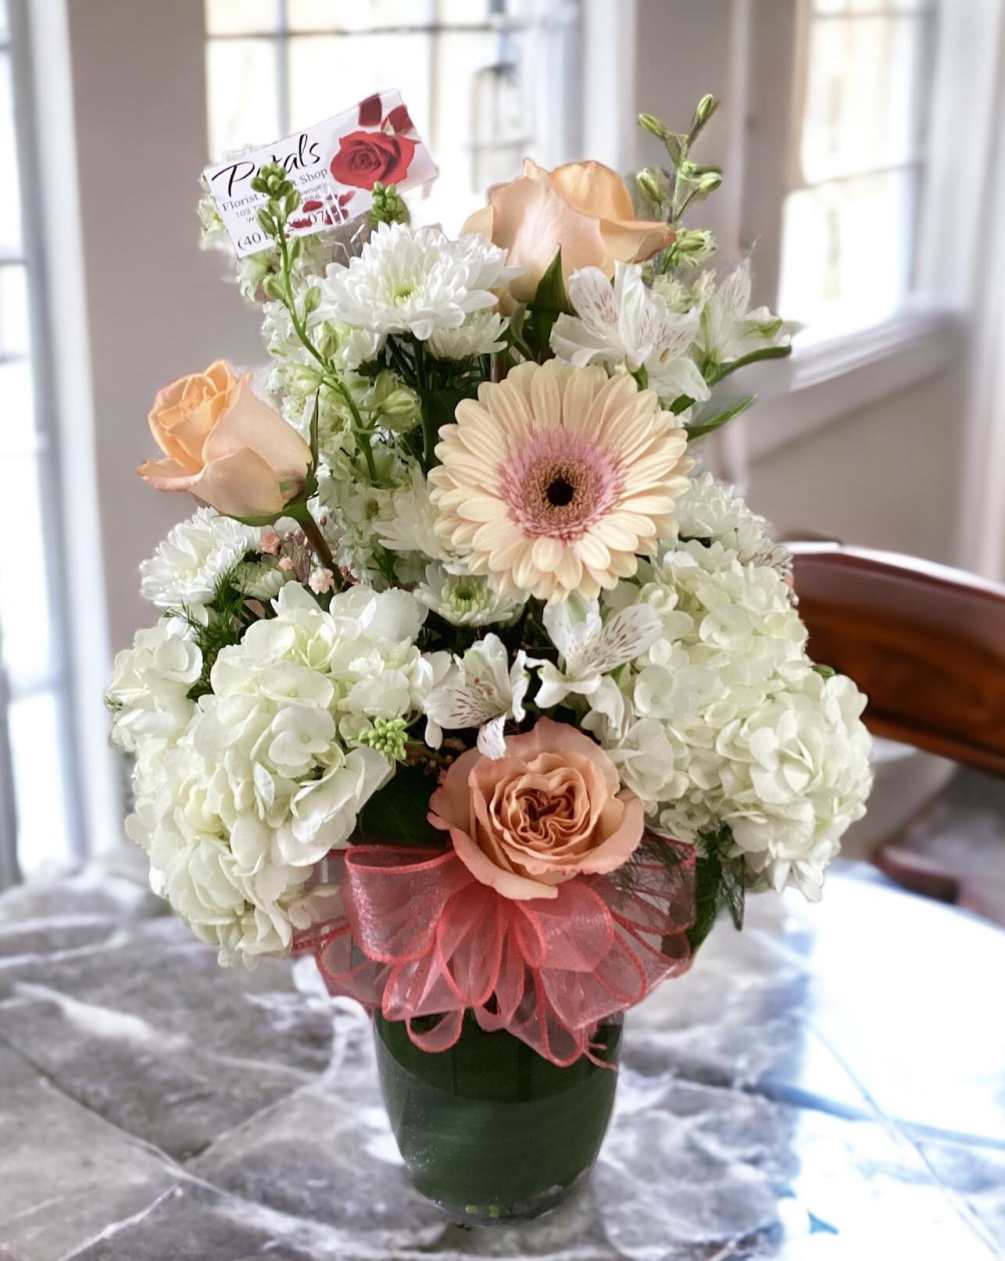 This bouquet is a Summer delight, designed with fluffy mounds of white